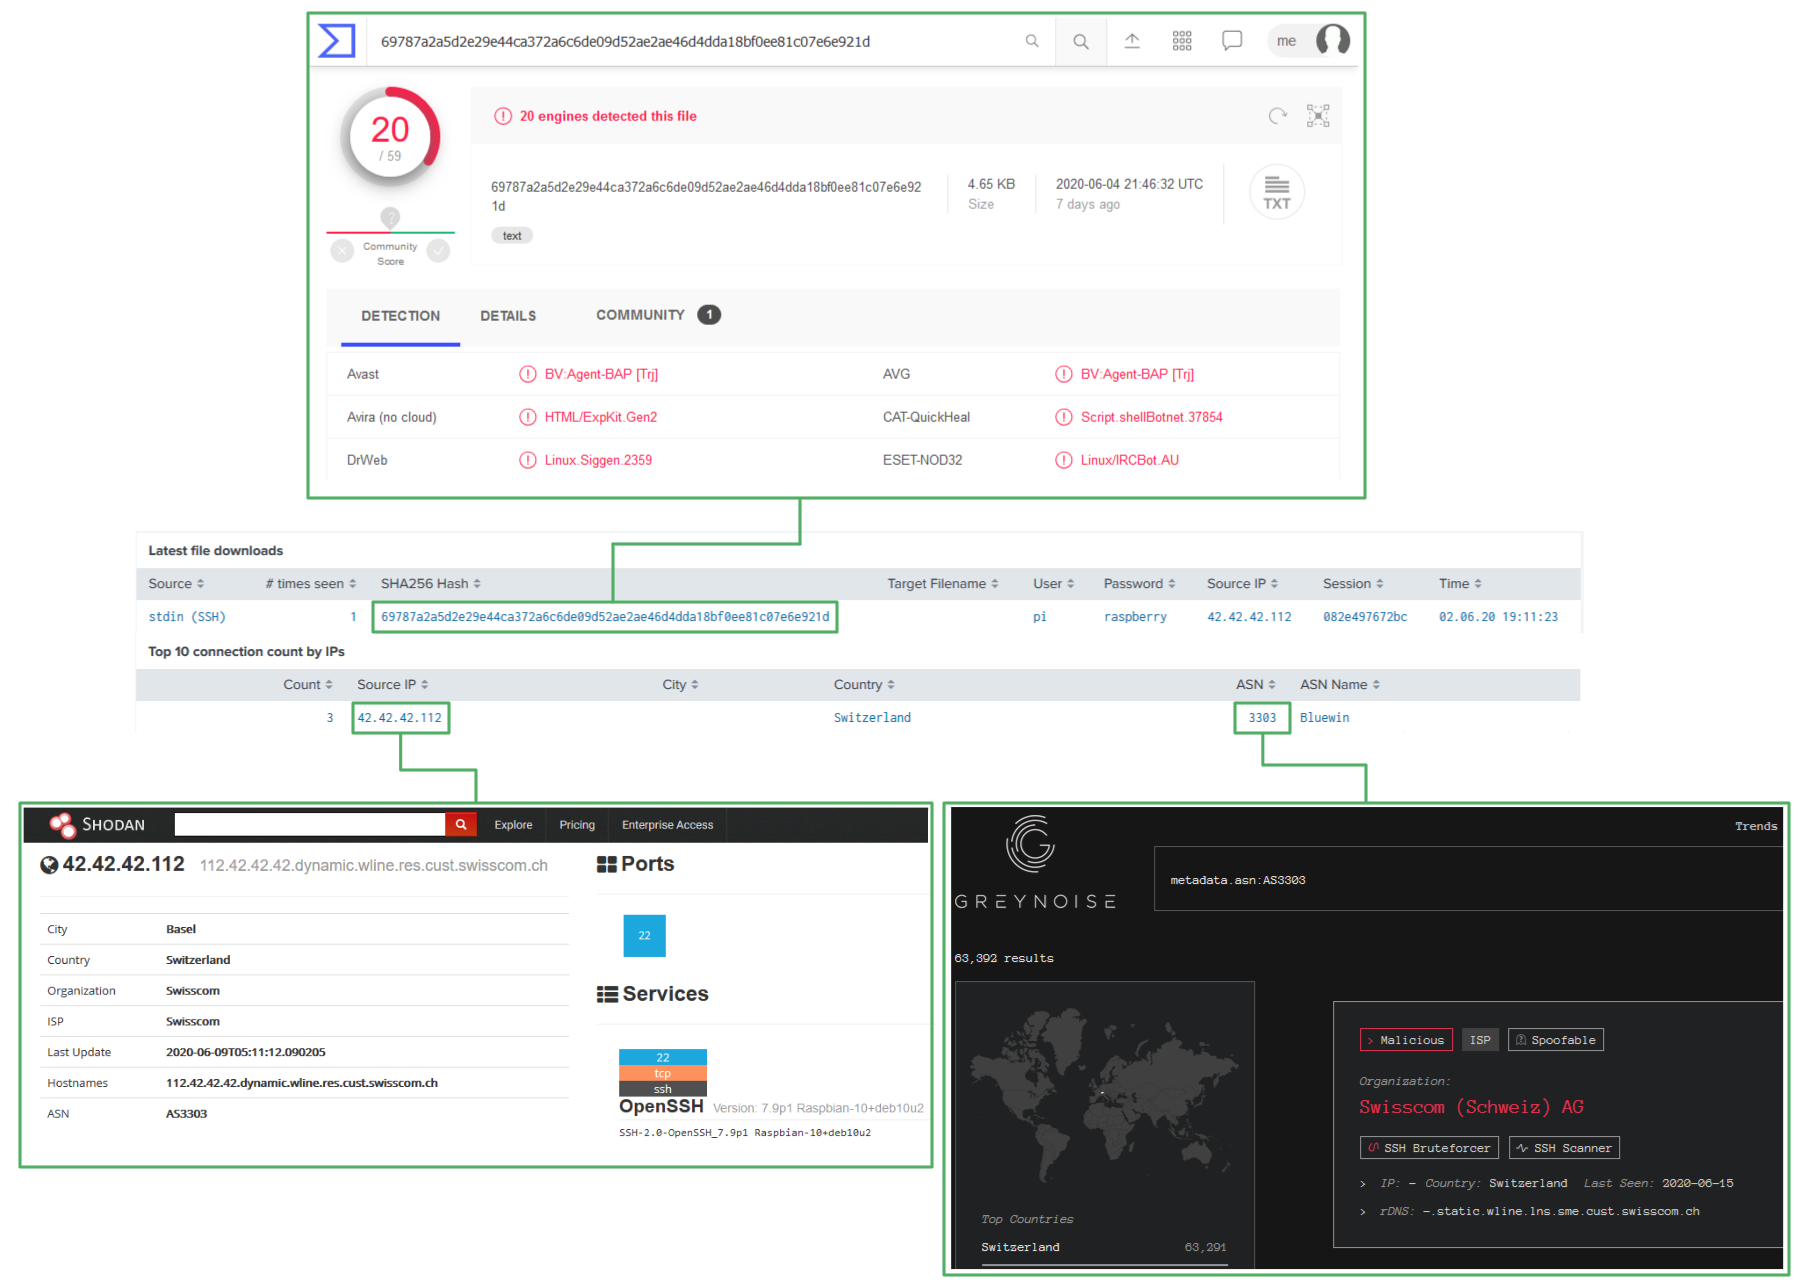 Splunk dashboard with breakout images showing previews of each linked service of the mentioned hash